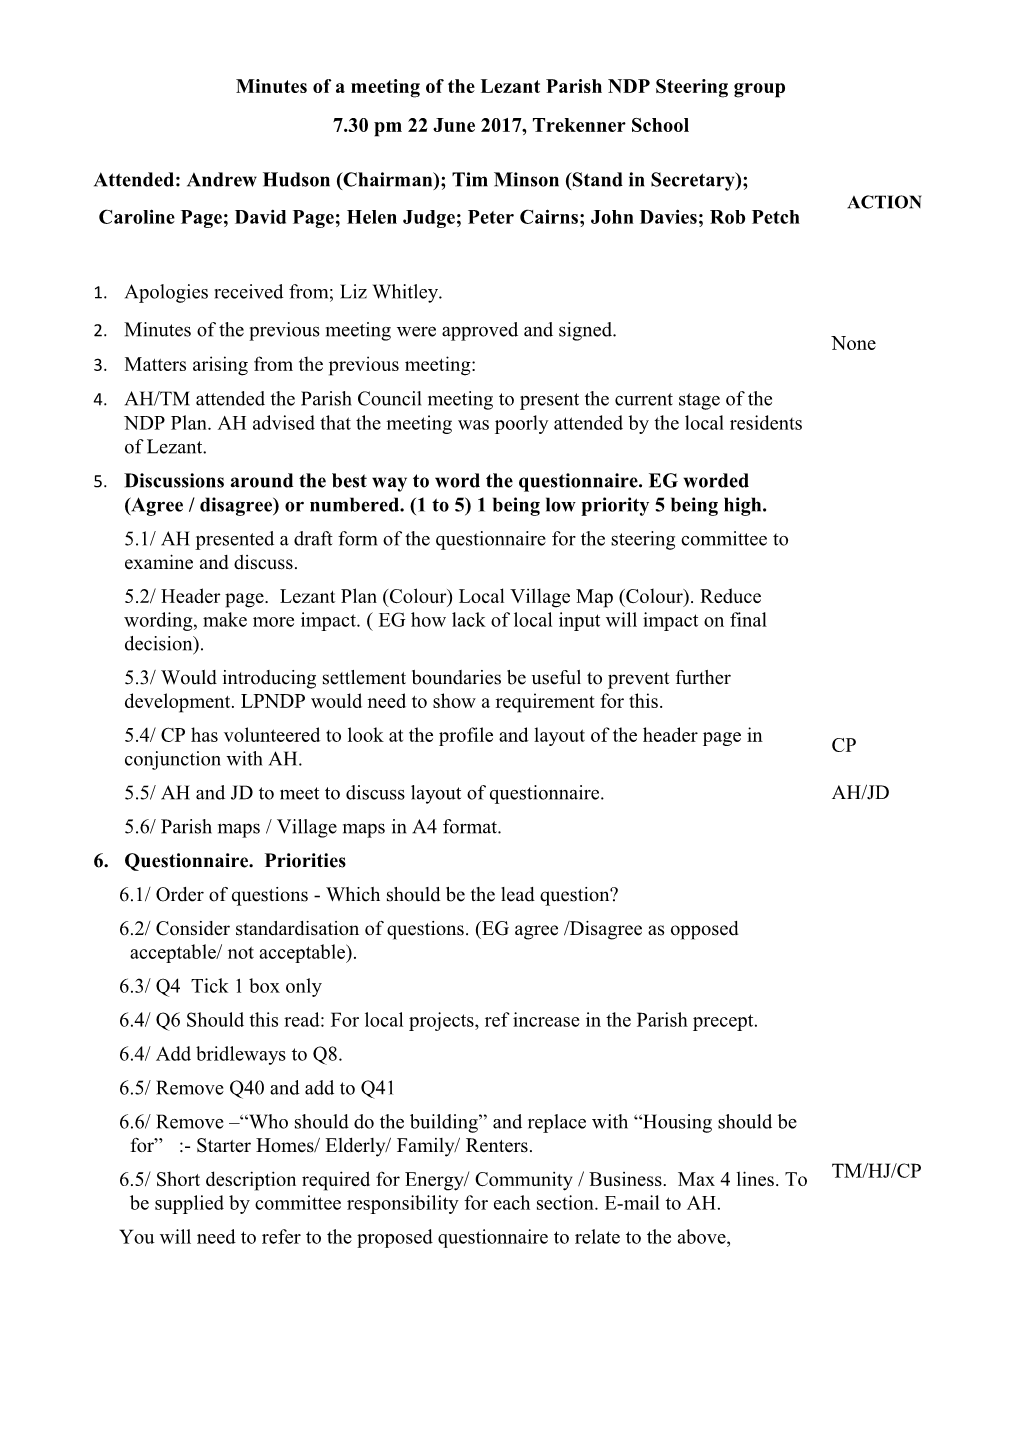 Minutes of a Meeting of the Lezant Parish NDP Steering Group